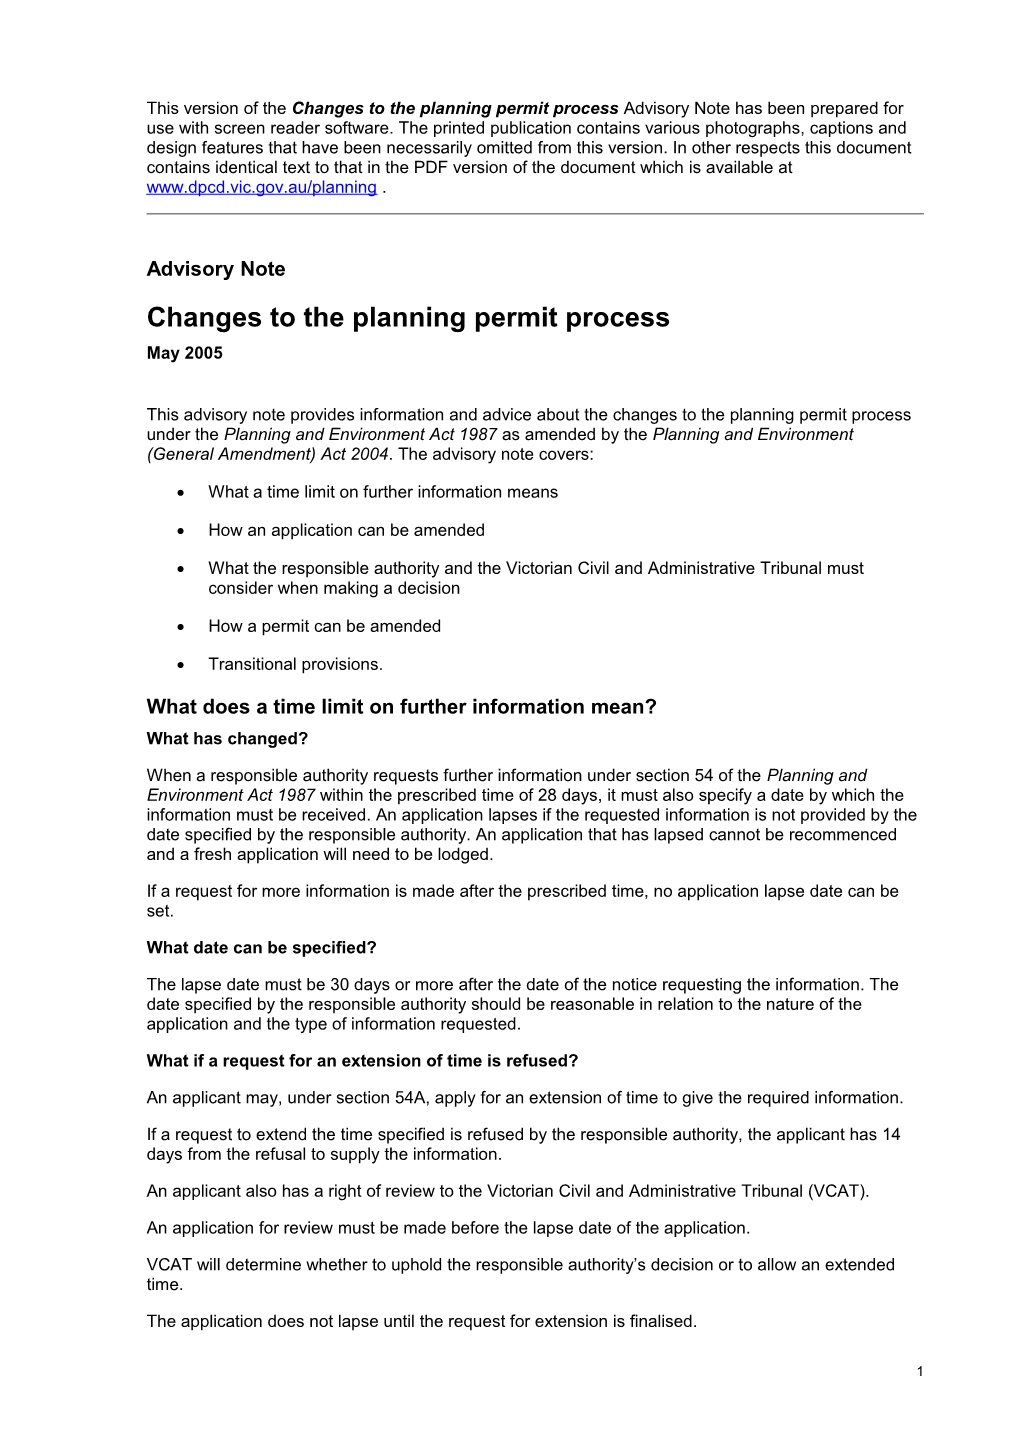 Changes to the Planning Permit Process Advisory Note